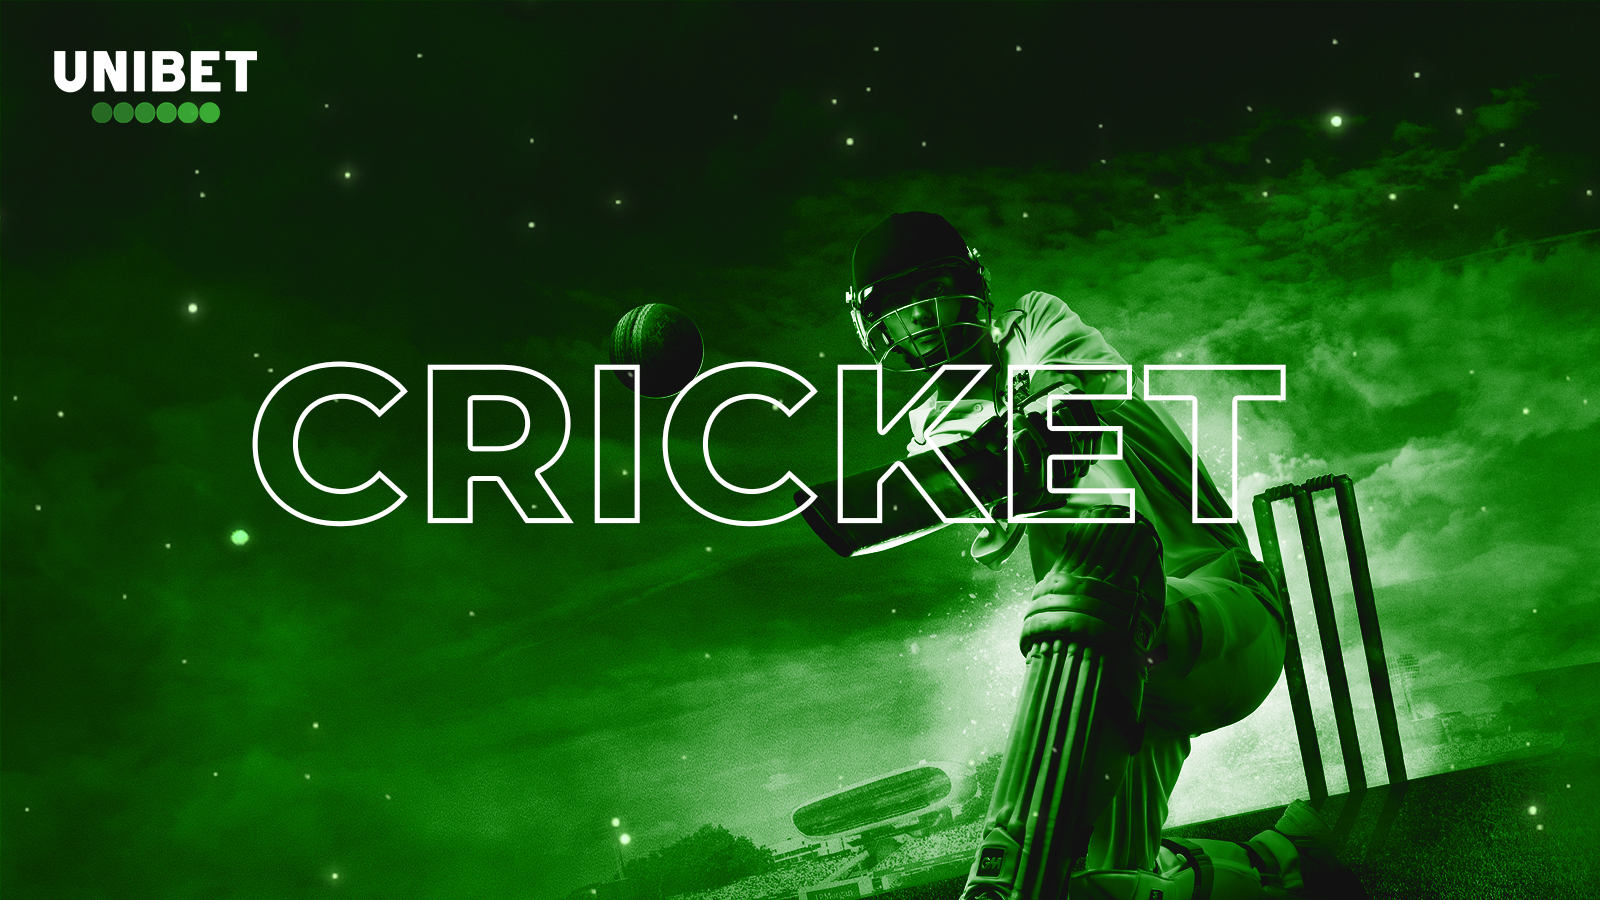 You can freely bet on cricket matches at Unibet.